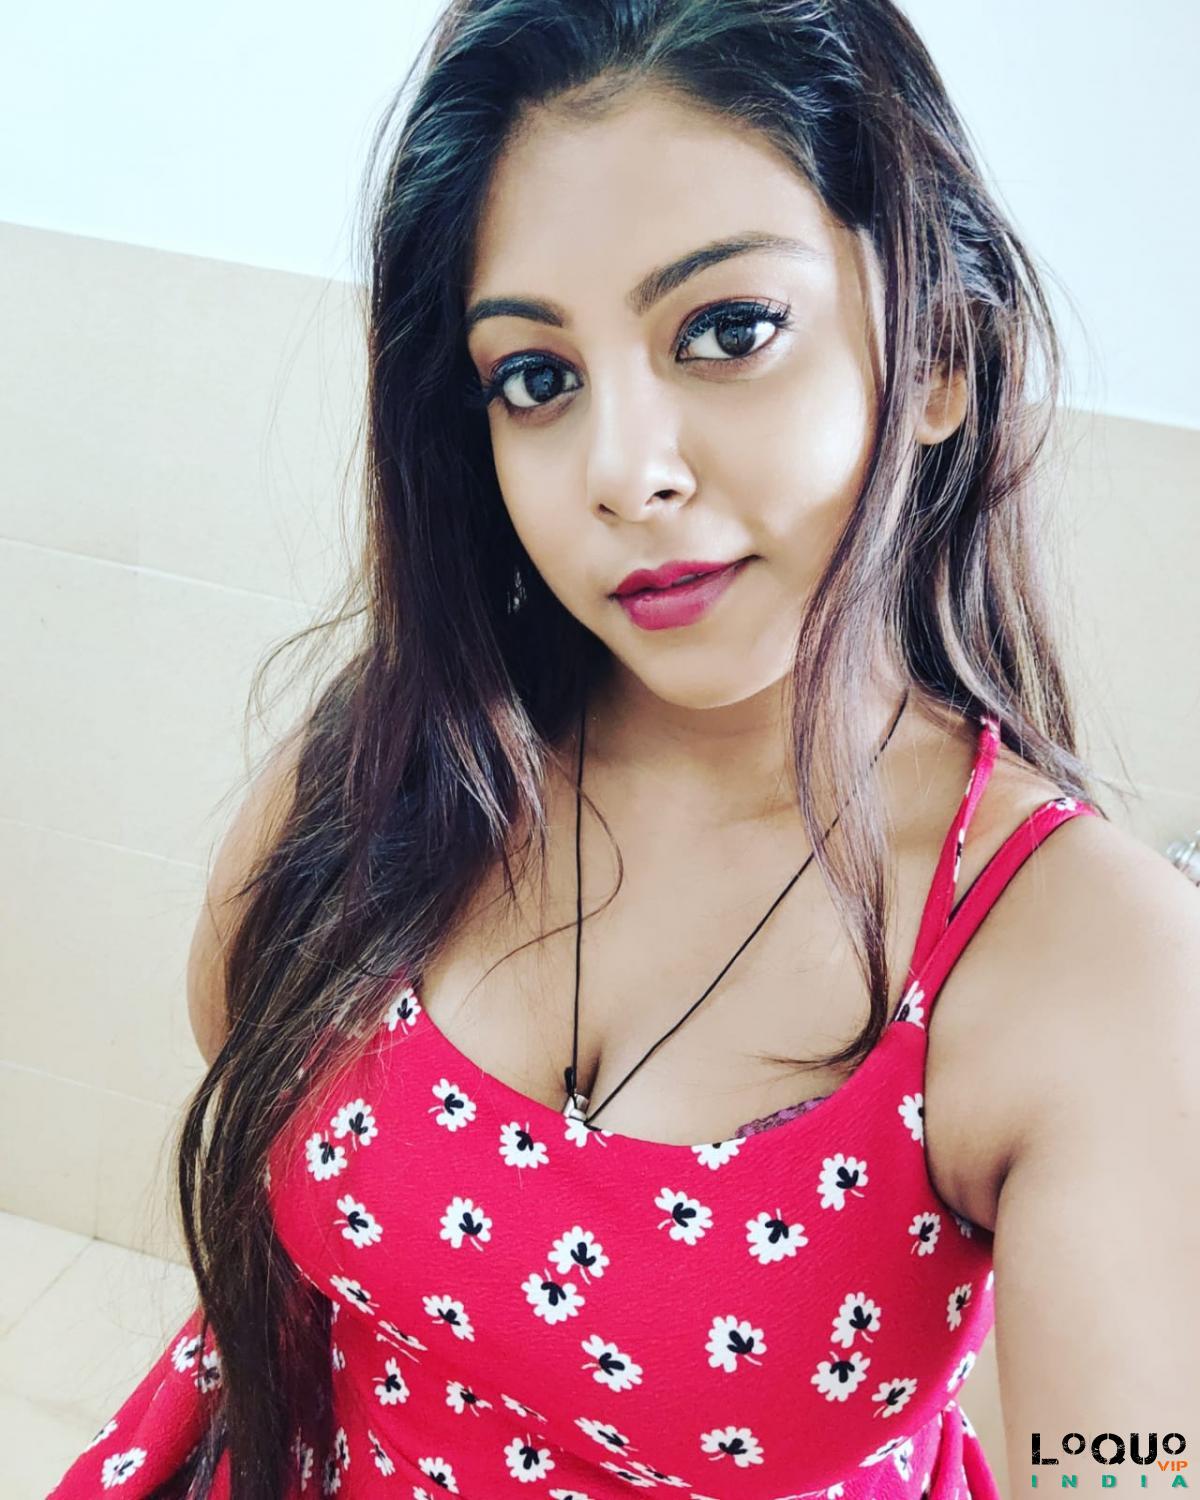 Call Girls Chandigarh: Naughty Call Girls in Mohali Sector 98 Phone No 6367492432 to book genuine and v